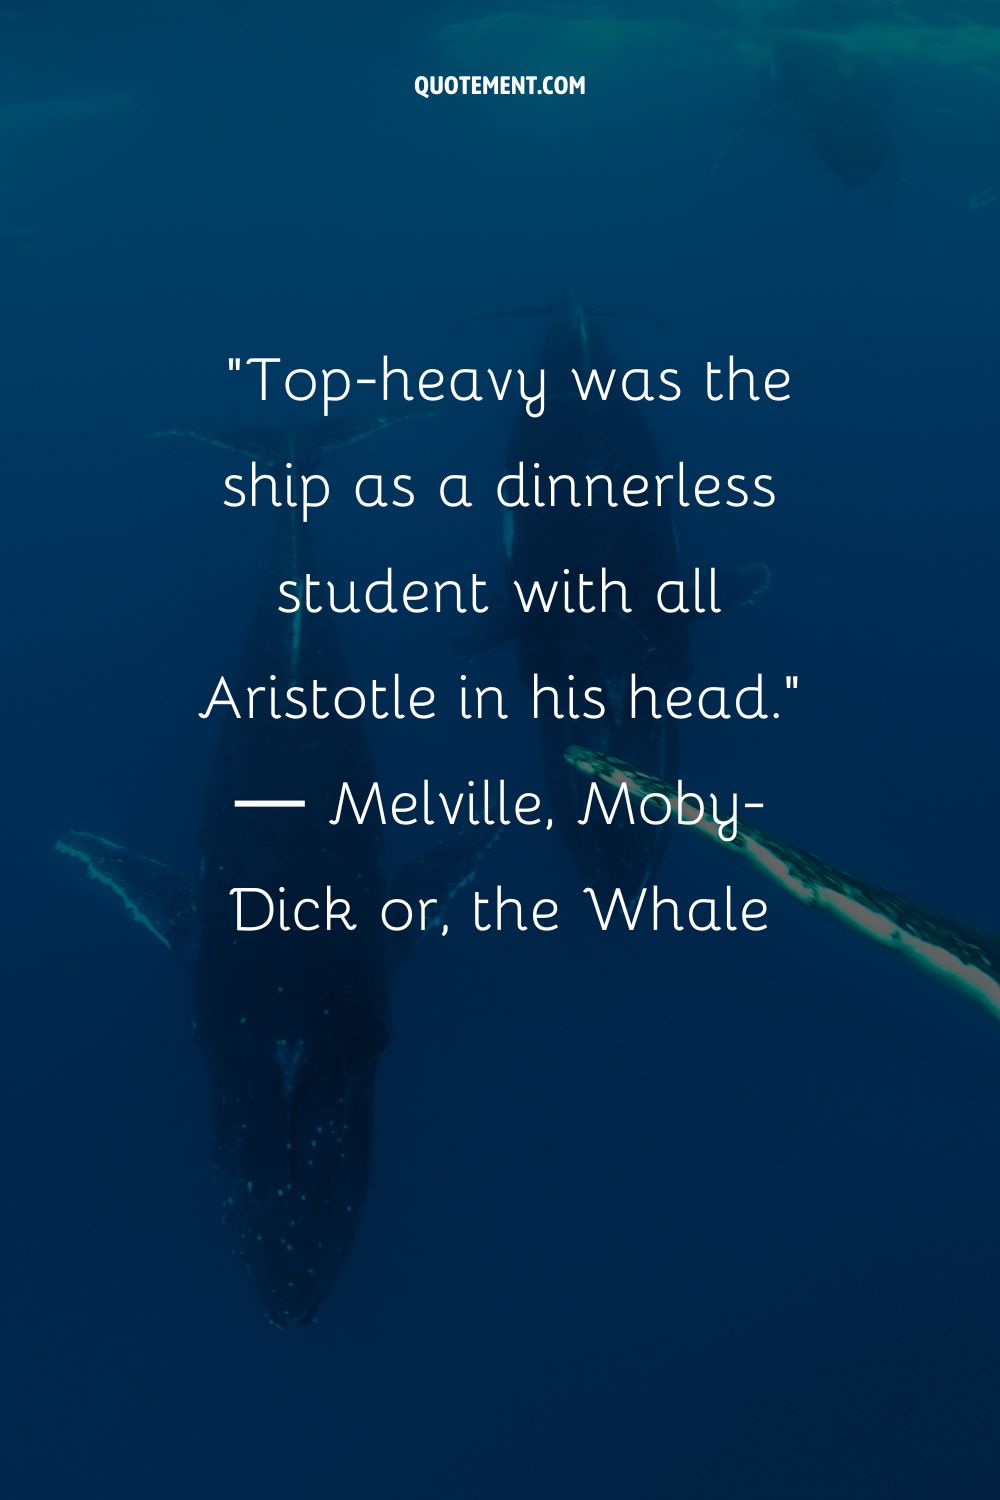 Top-heavy was the ship as a dinnerless student with all Aristotle in his head.